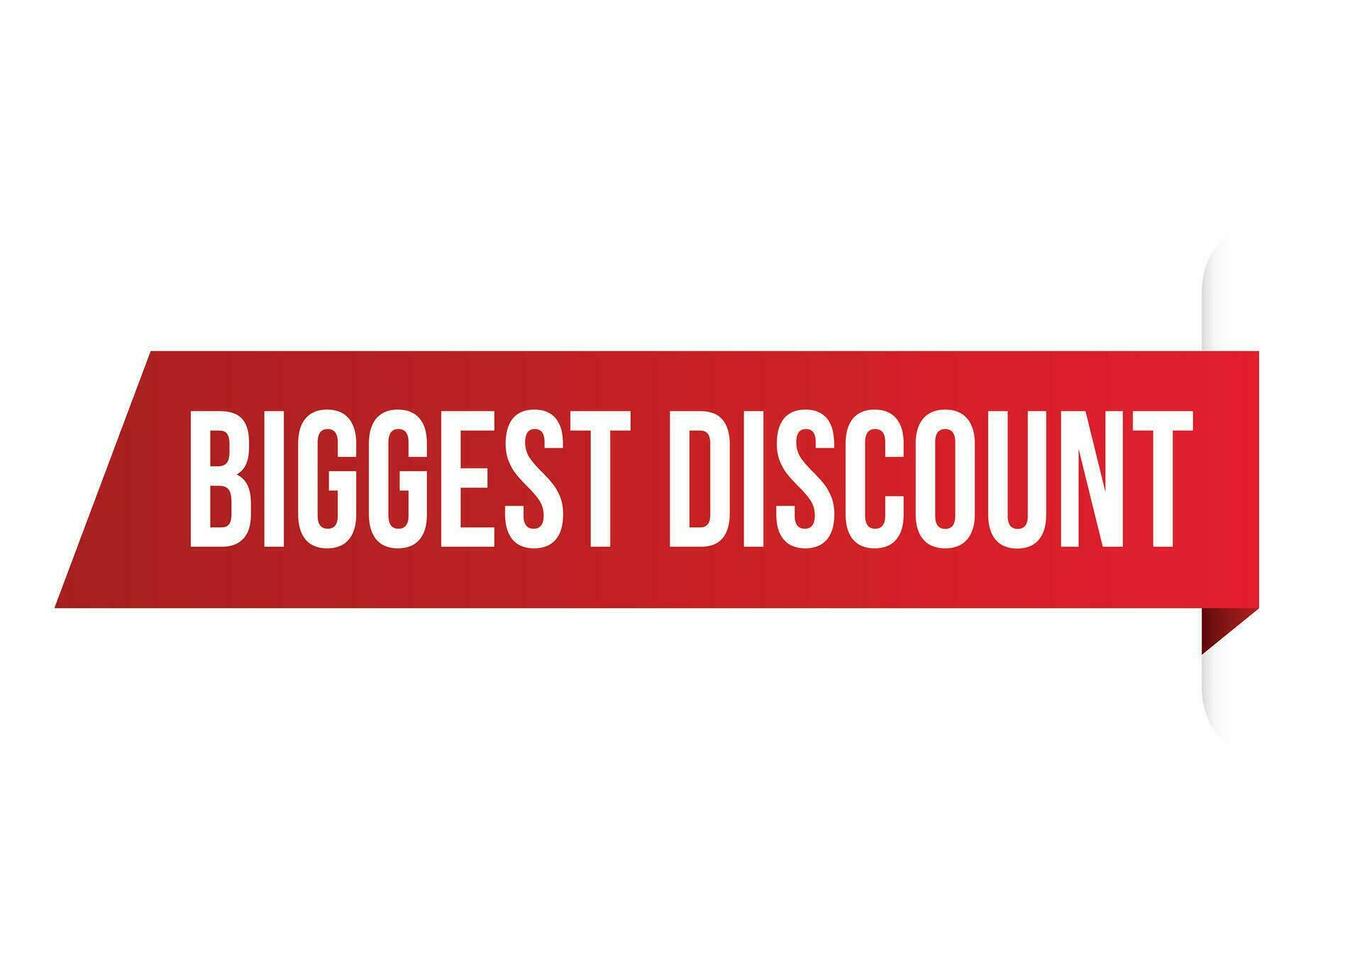 biggest discount red vector banner illustration isolated on white background